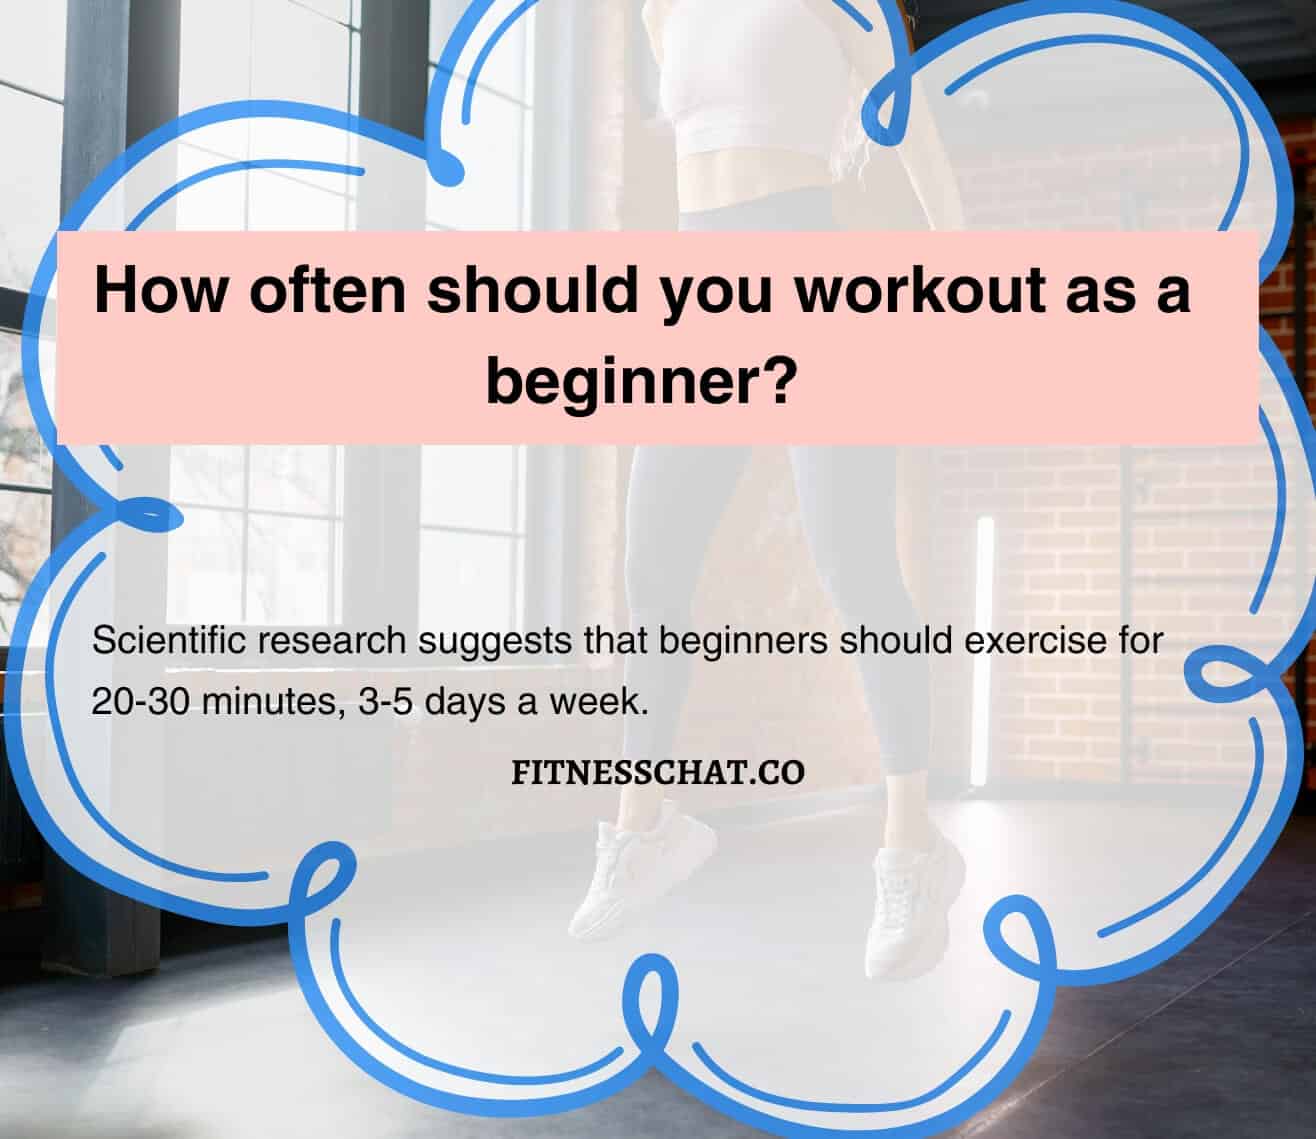 How often should you workout as a beginner